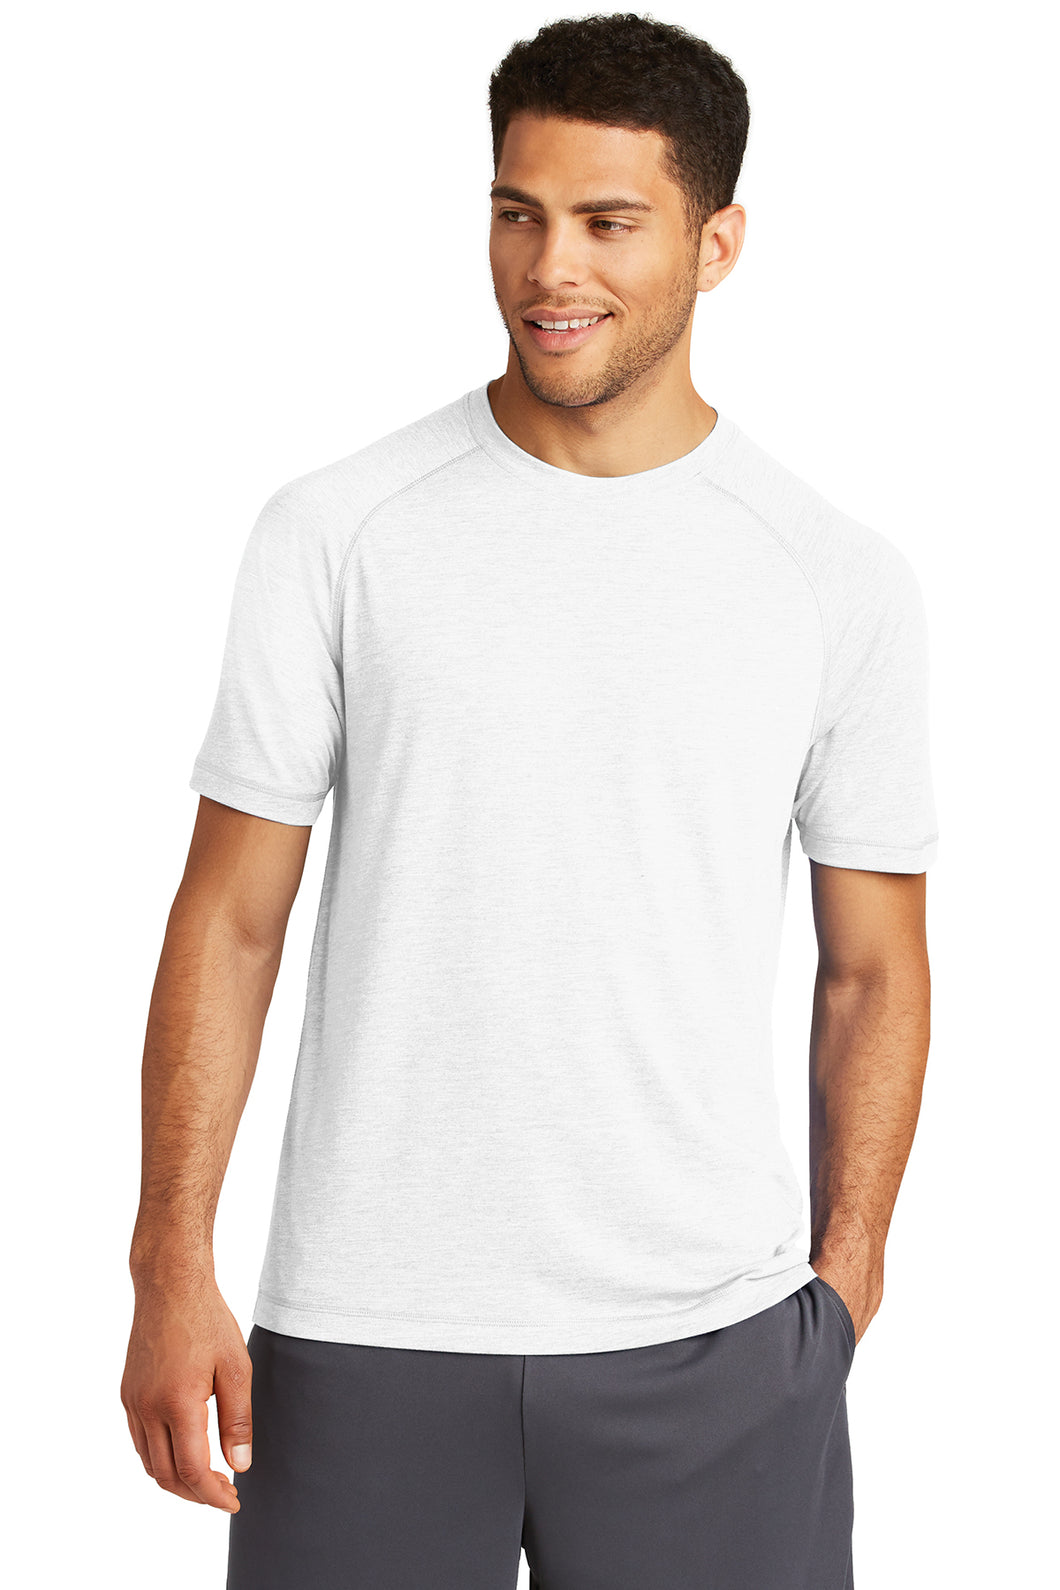 Fusion Performance Top - White